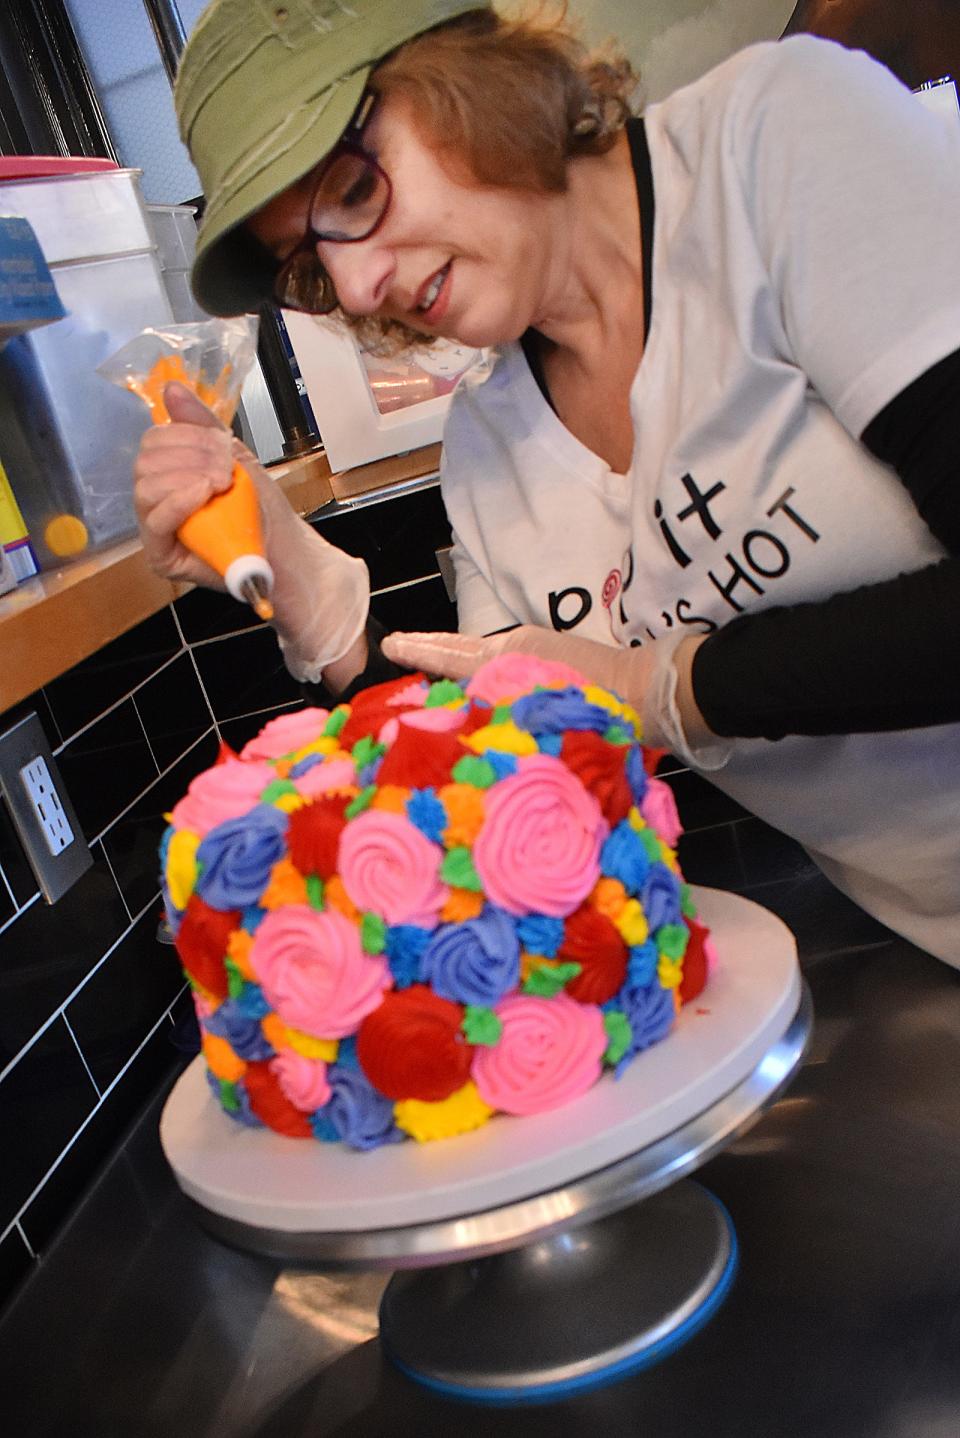 Lisa Petrizzi-Geller, owner of Pop Culture, works on a cake in her new Fall River shop.